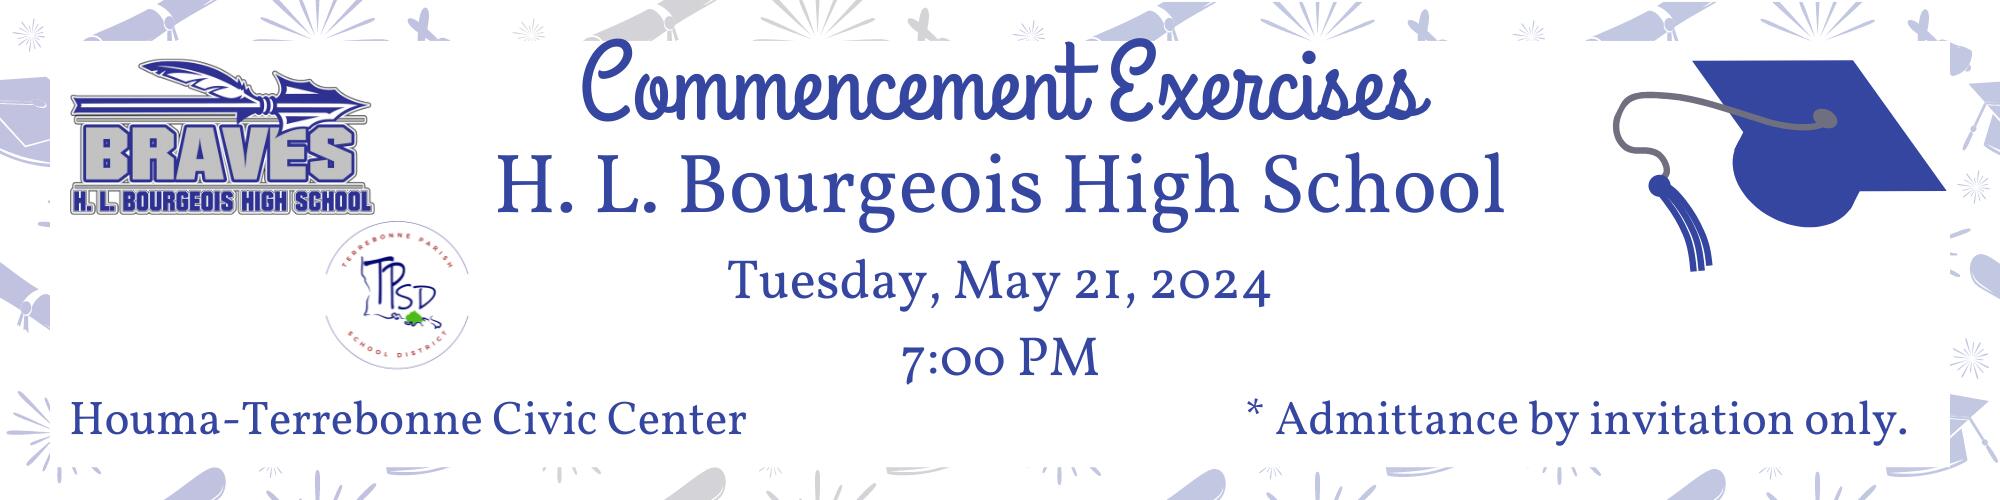 HLB Commencement Exercises